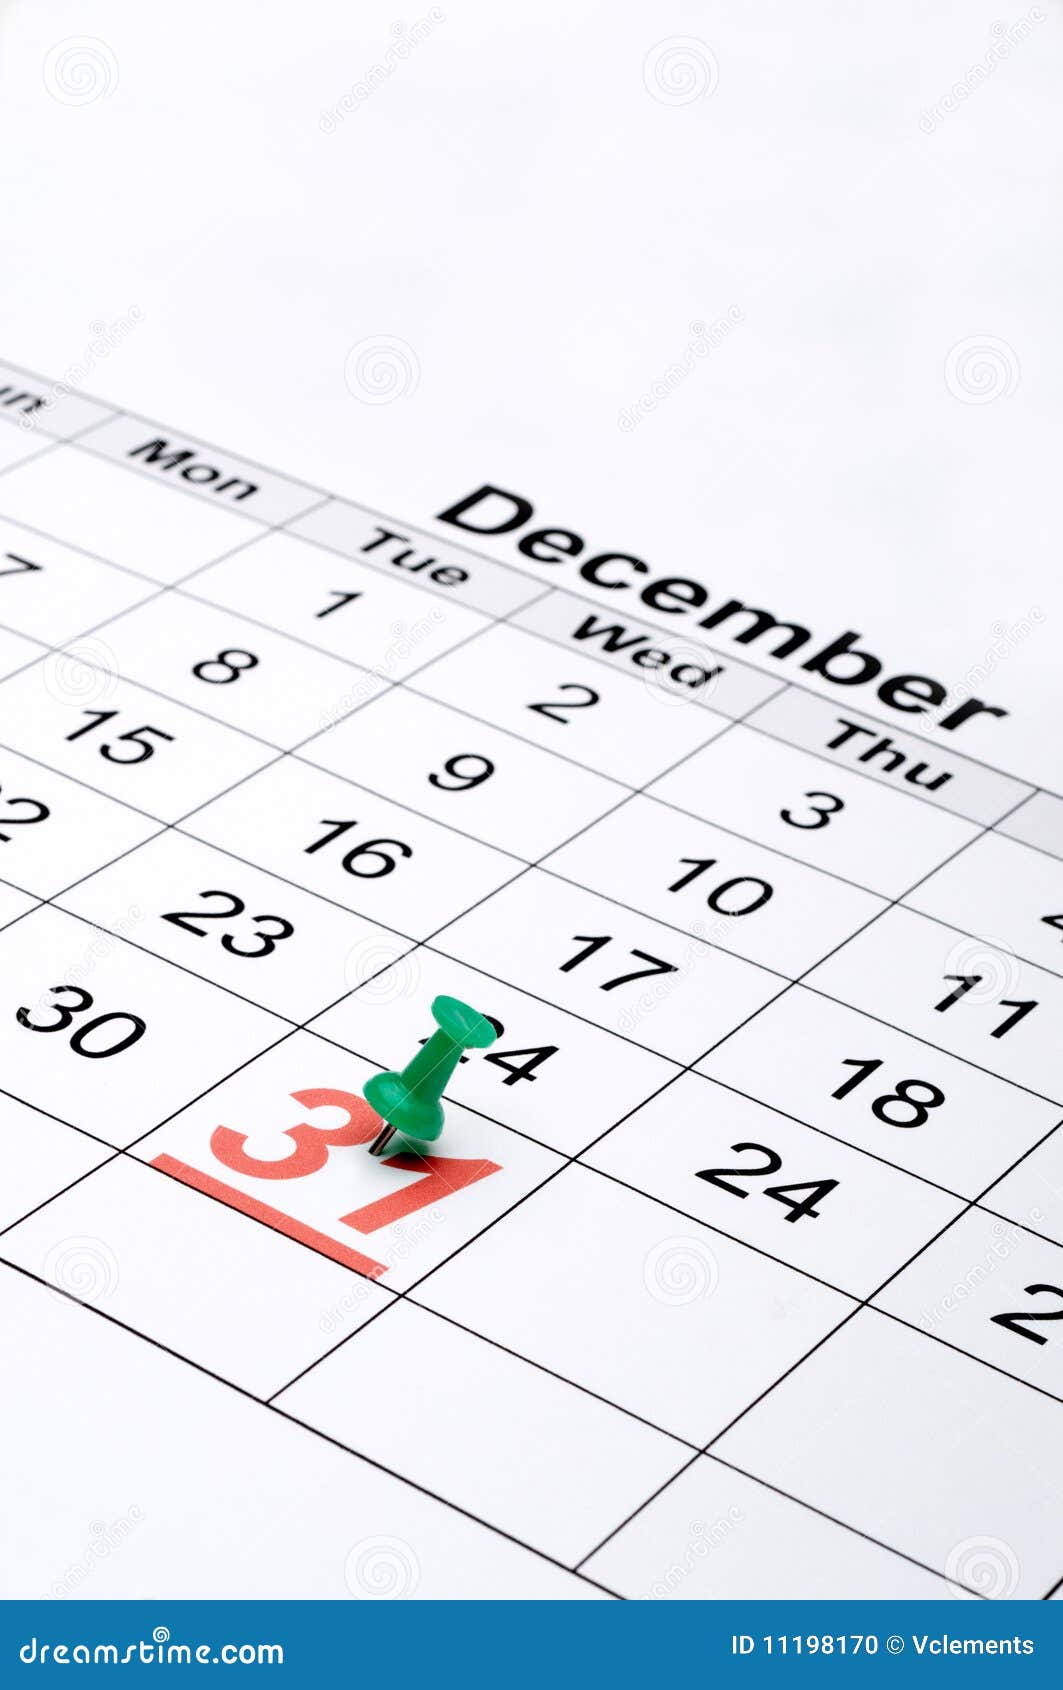 a calendar with new year's day marked with a g